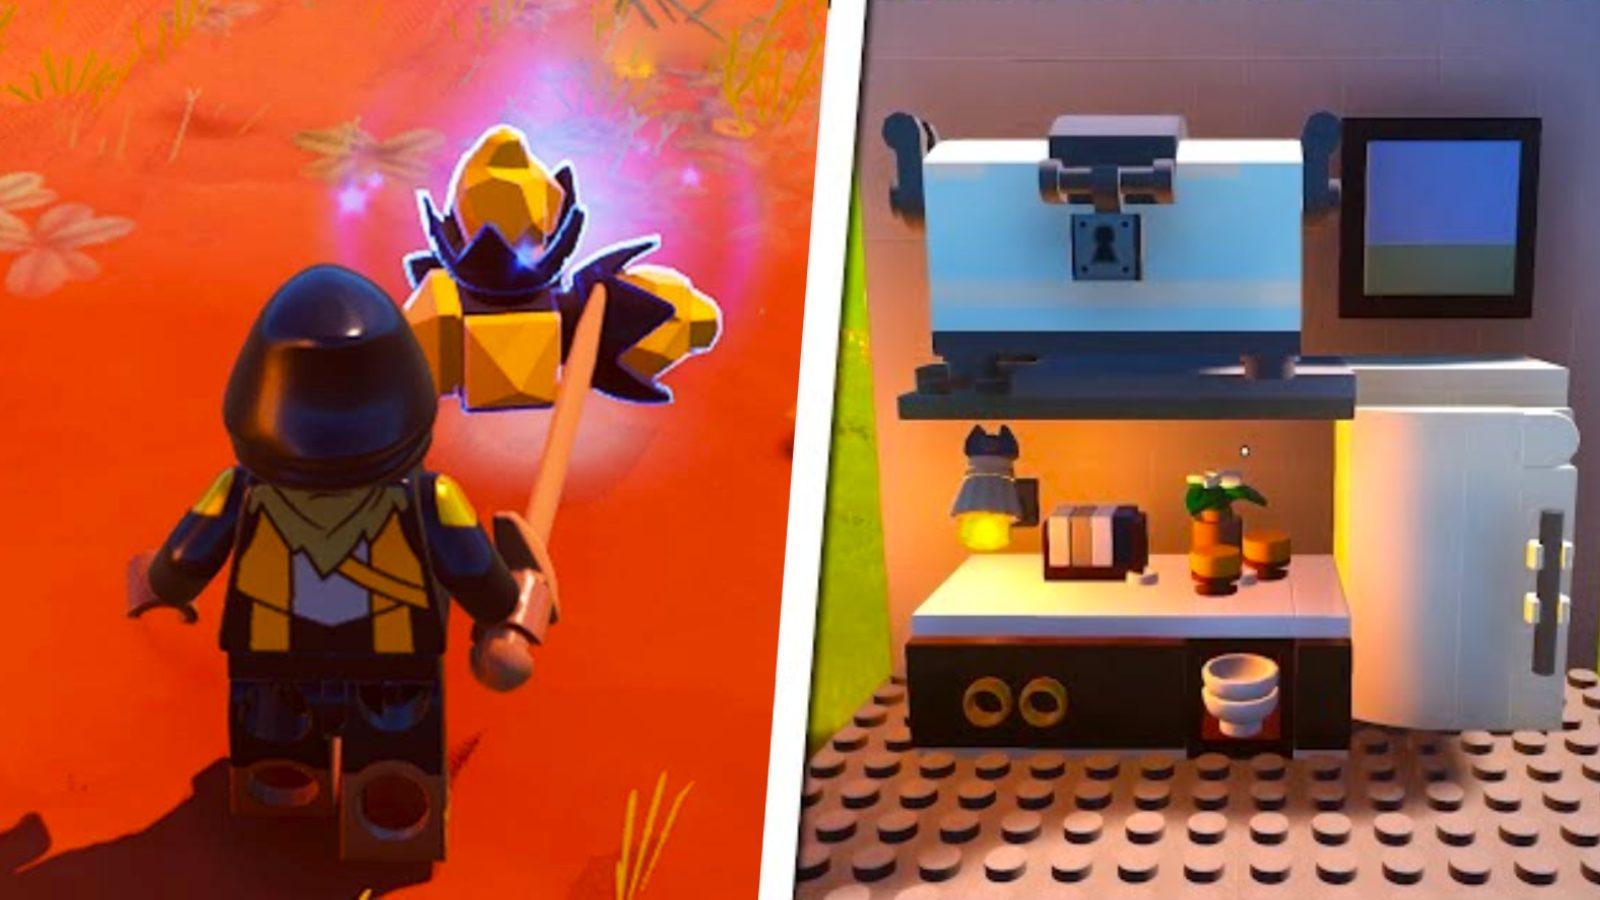 LEGO Fortnite player finding Brightcore and building a Fridge.